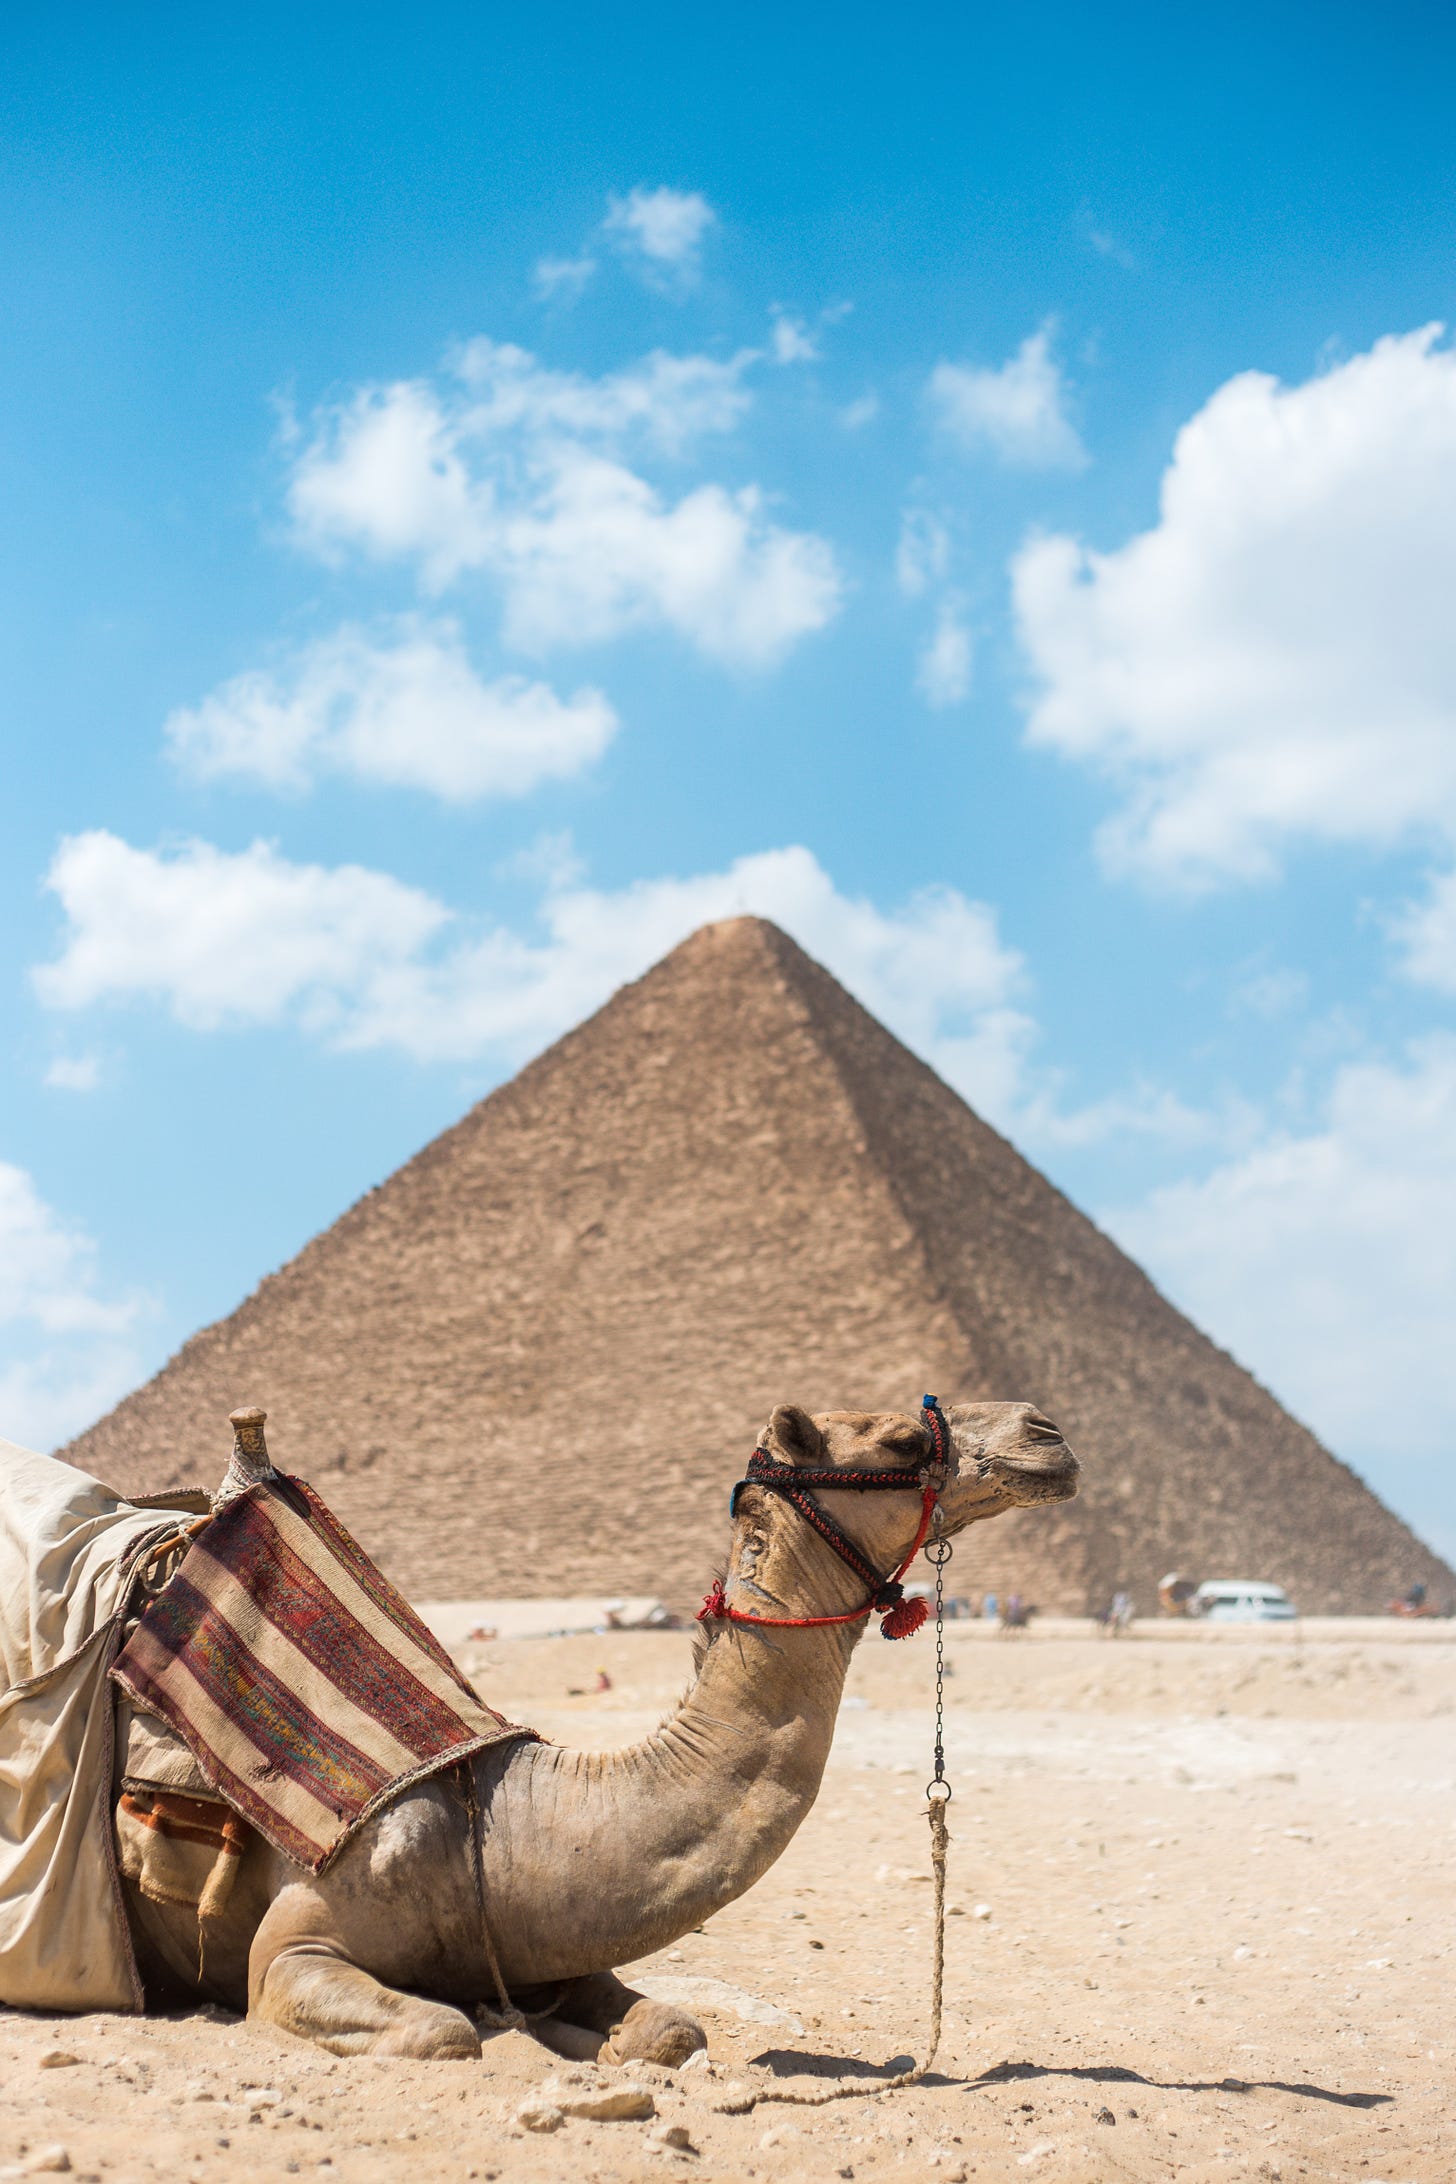 A camel lying in front of one of the pyramids at Giza with a blue sky and fluffy white clouds above